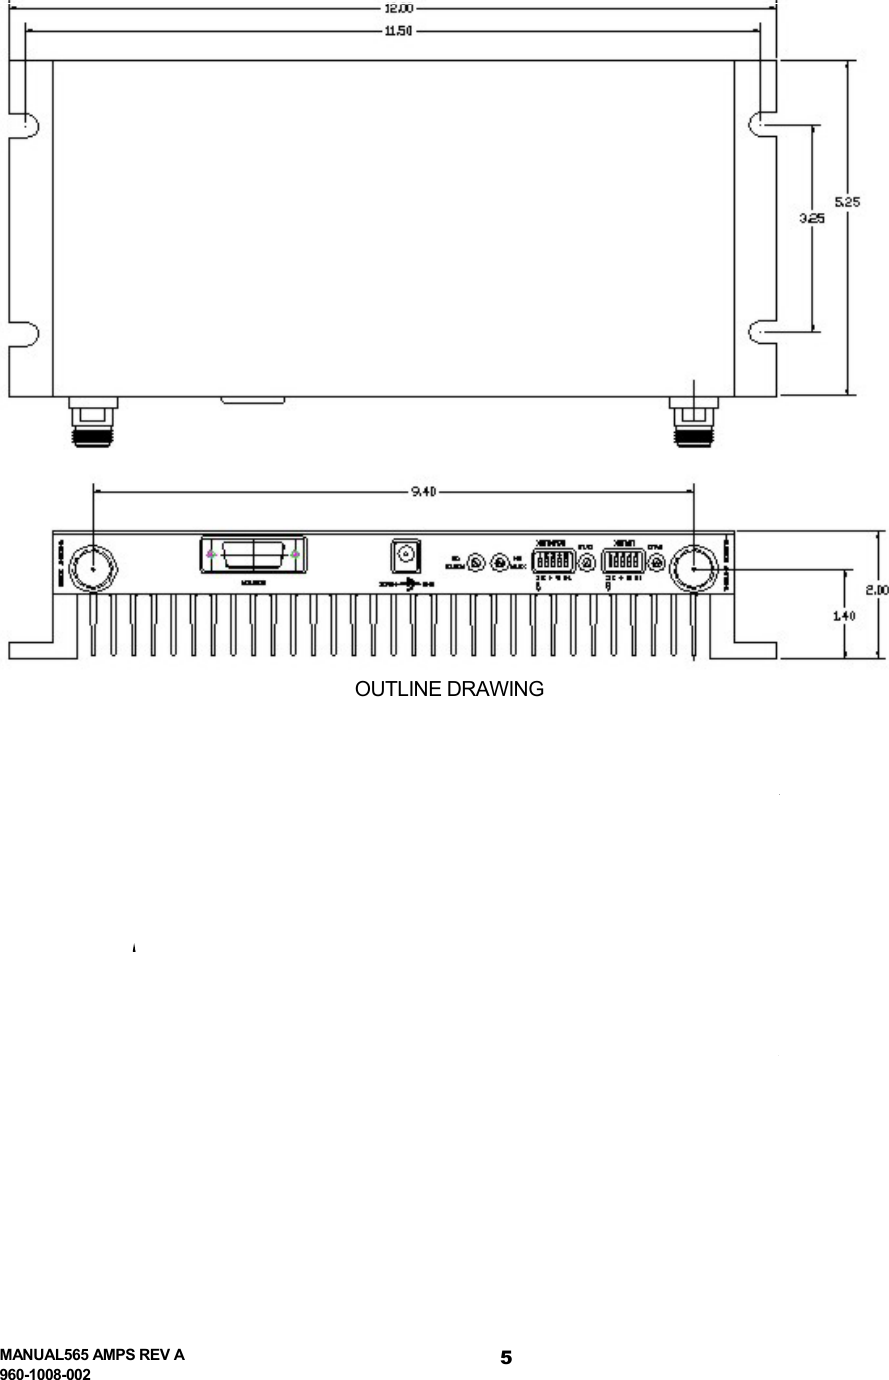  MANUAL565 AMPS REV A 960-1008-002 5 OUTLINE DRAWING                   